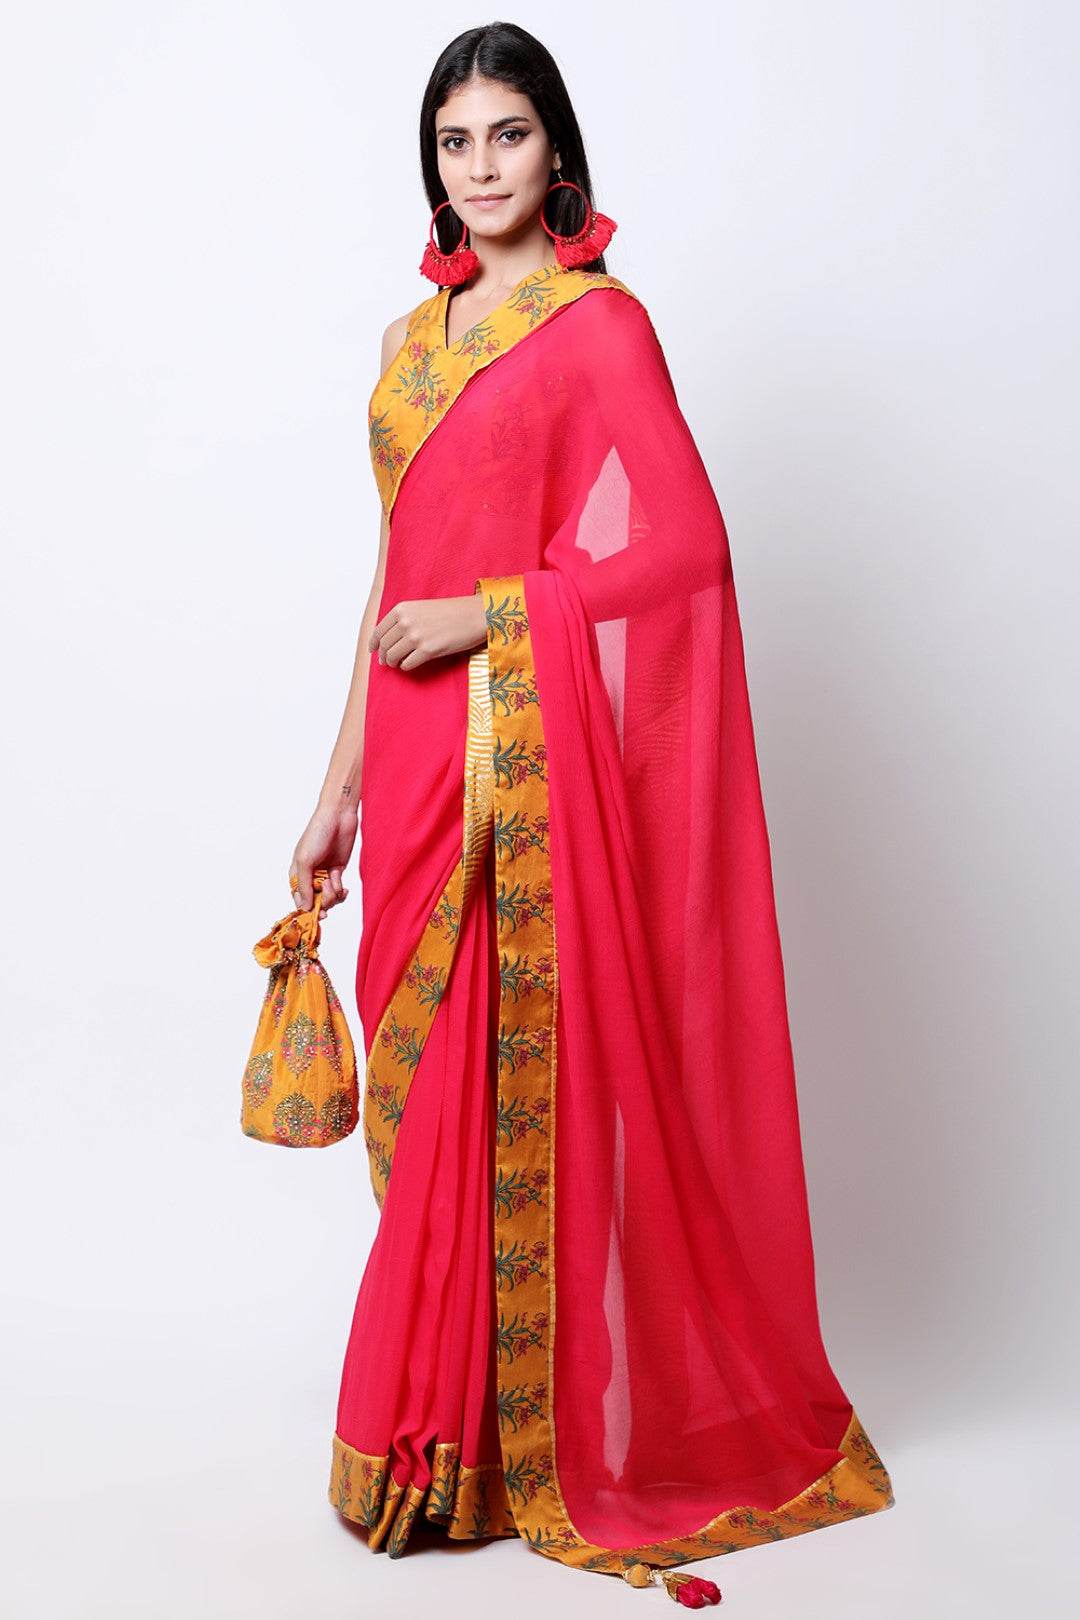 Rose Red chiffon saree , paired with ochre hand embroidered teen phool guldasta blouse.